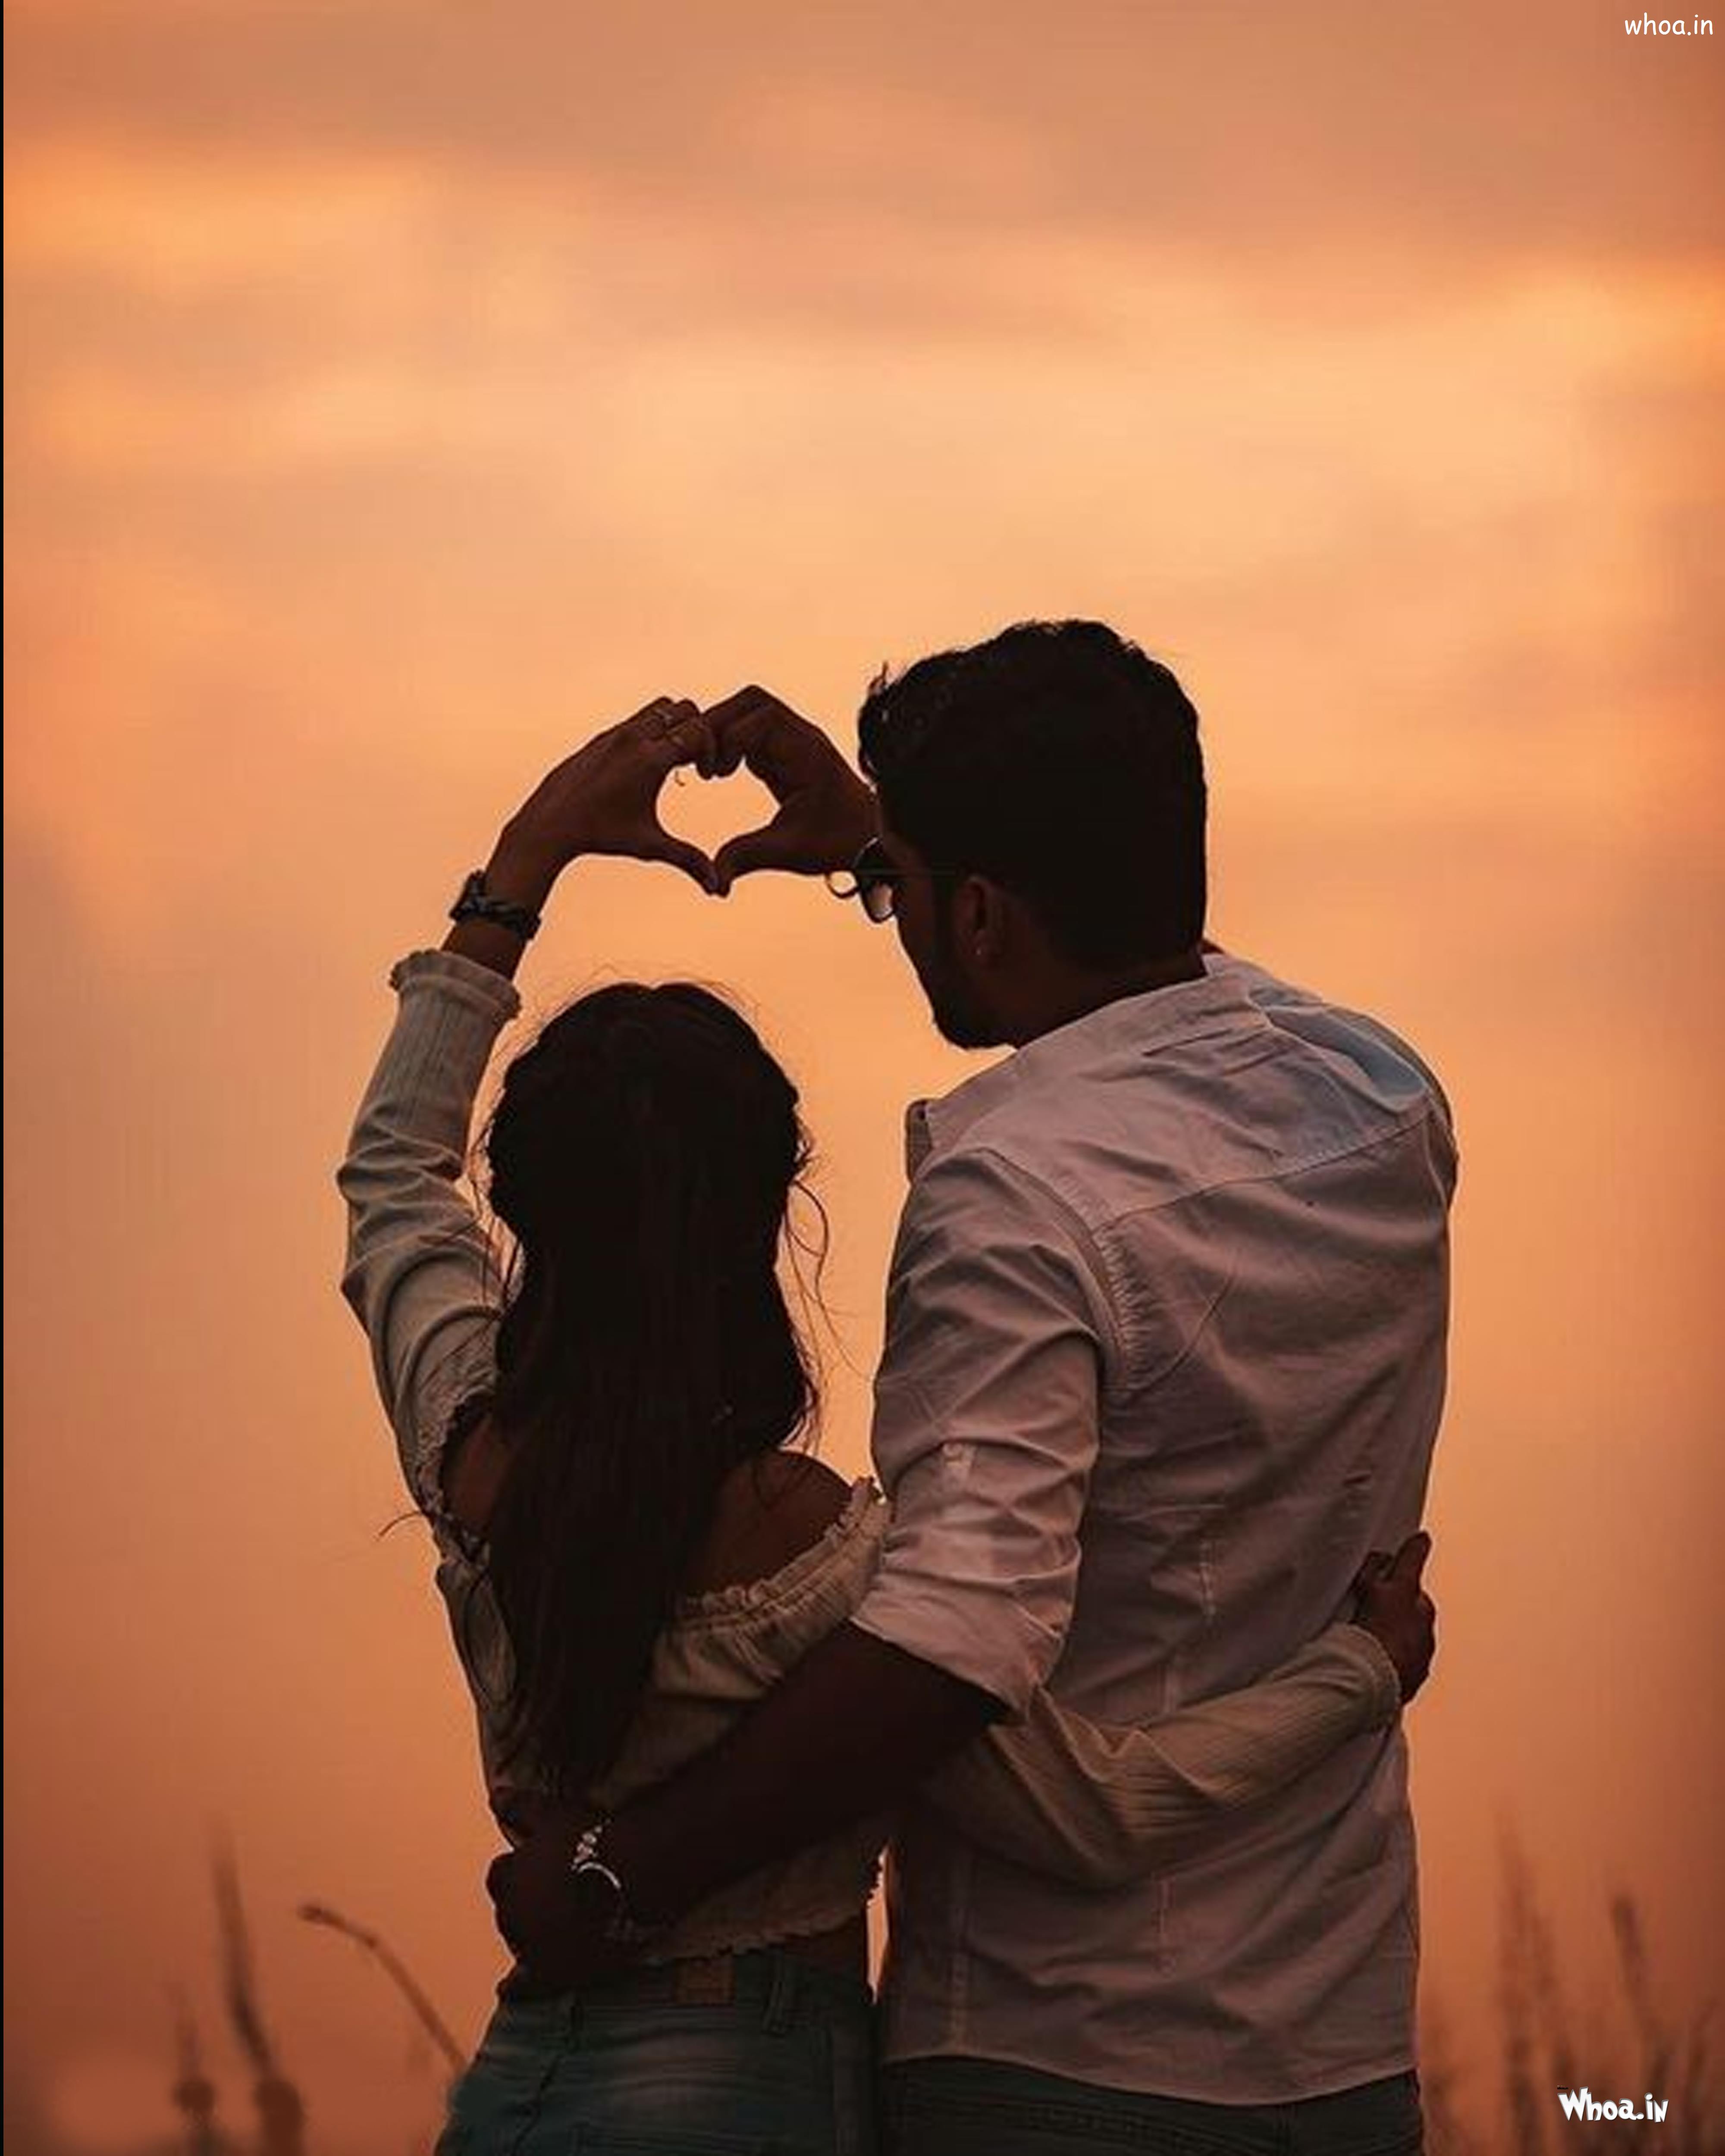 Photoshoot Love Heart Created By Young Couple Hand HD Images